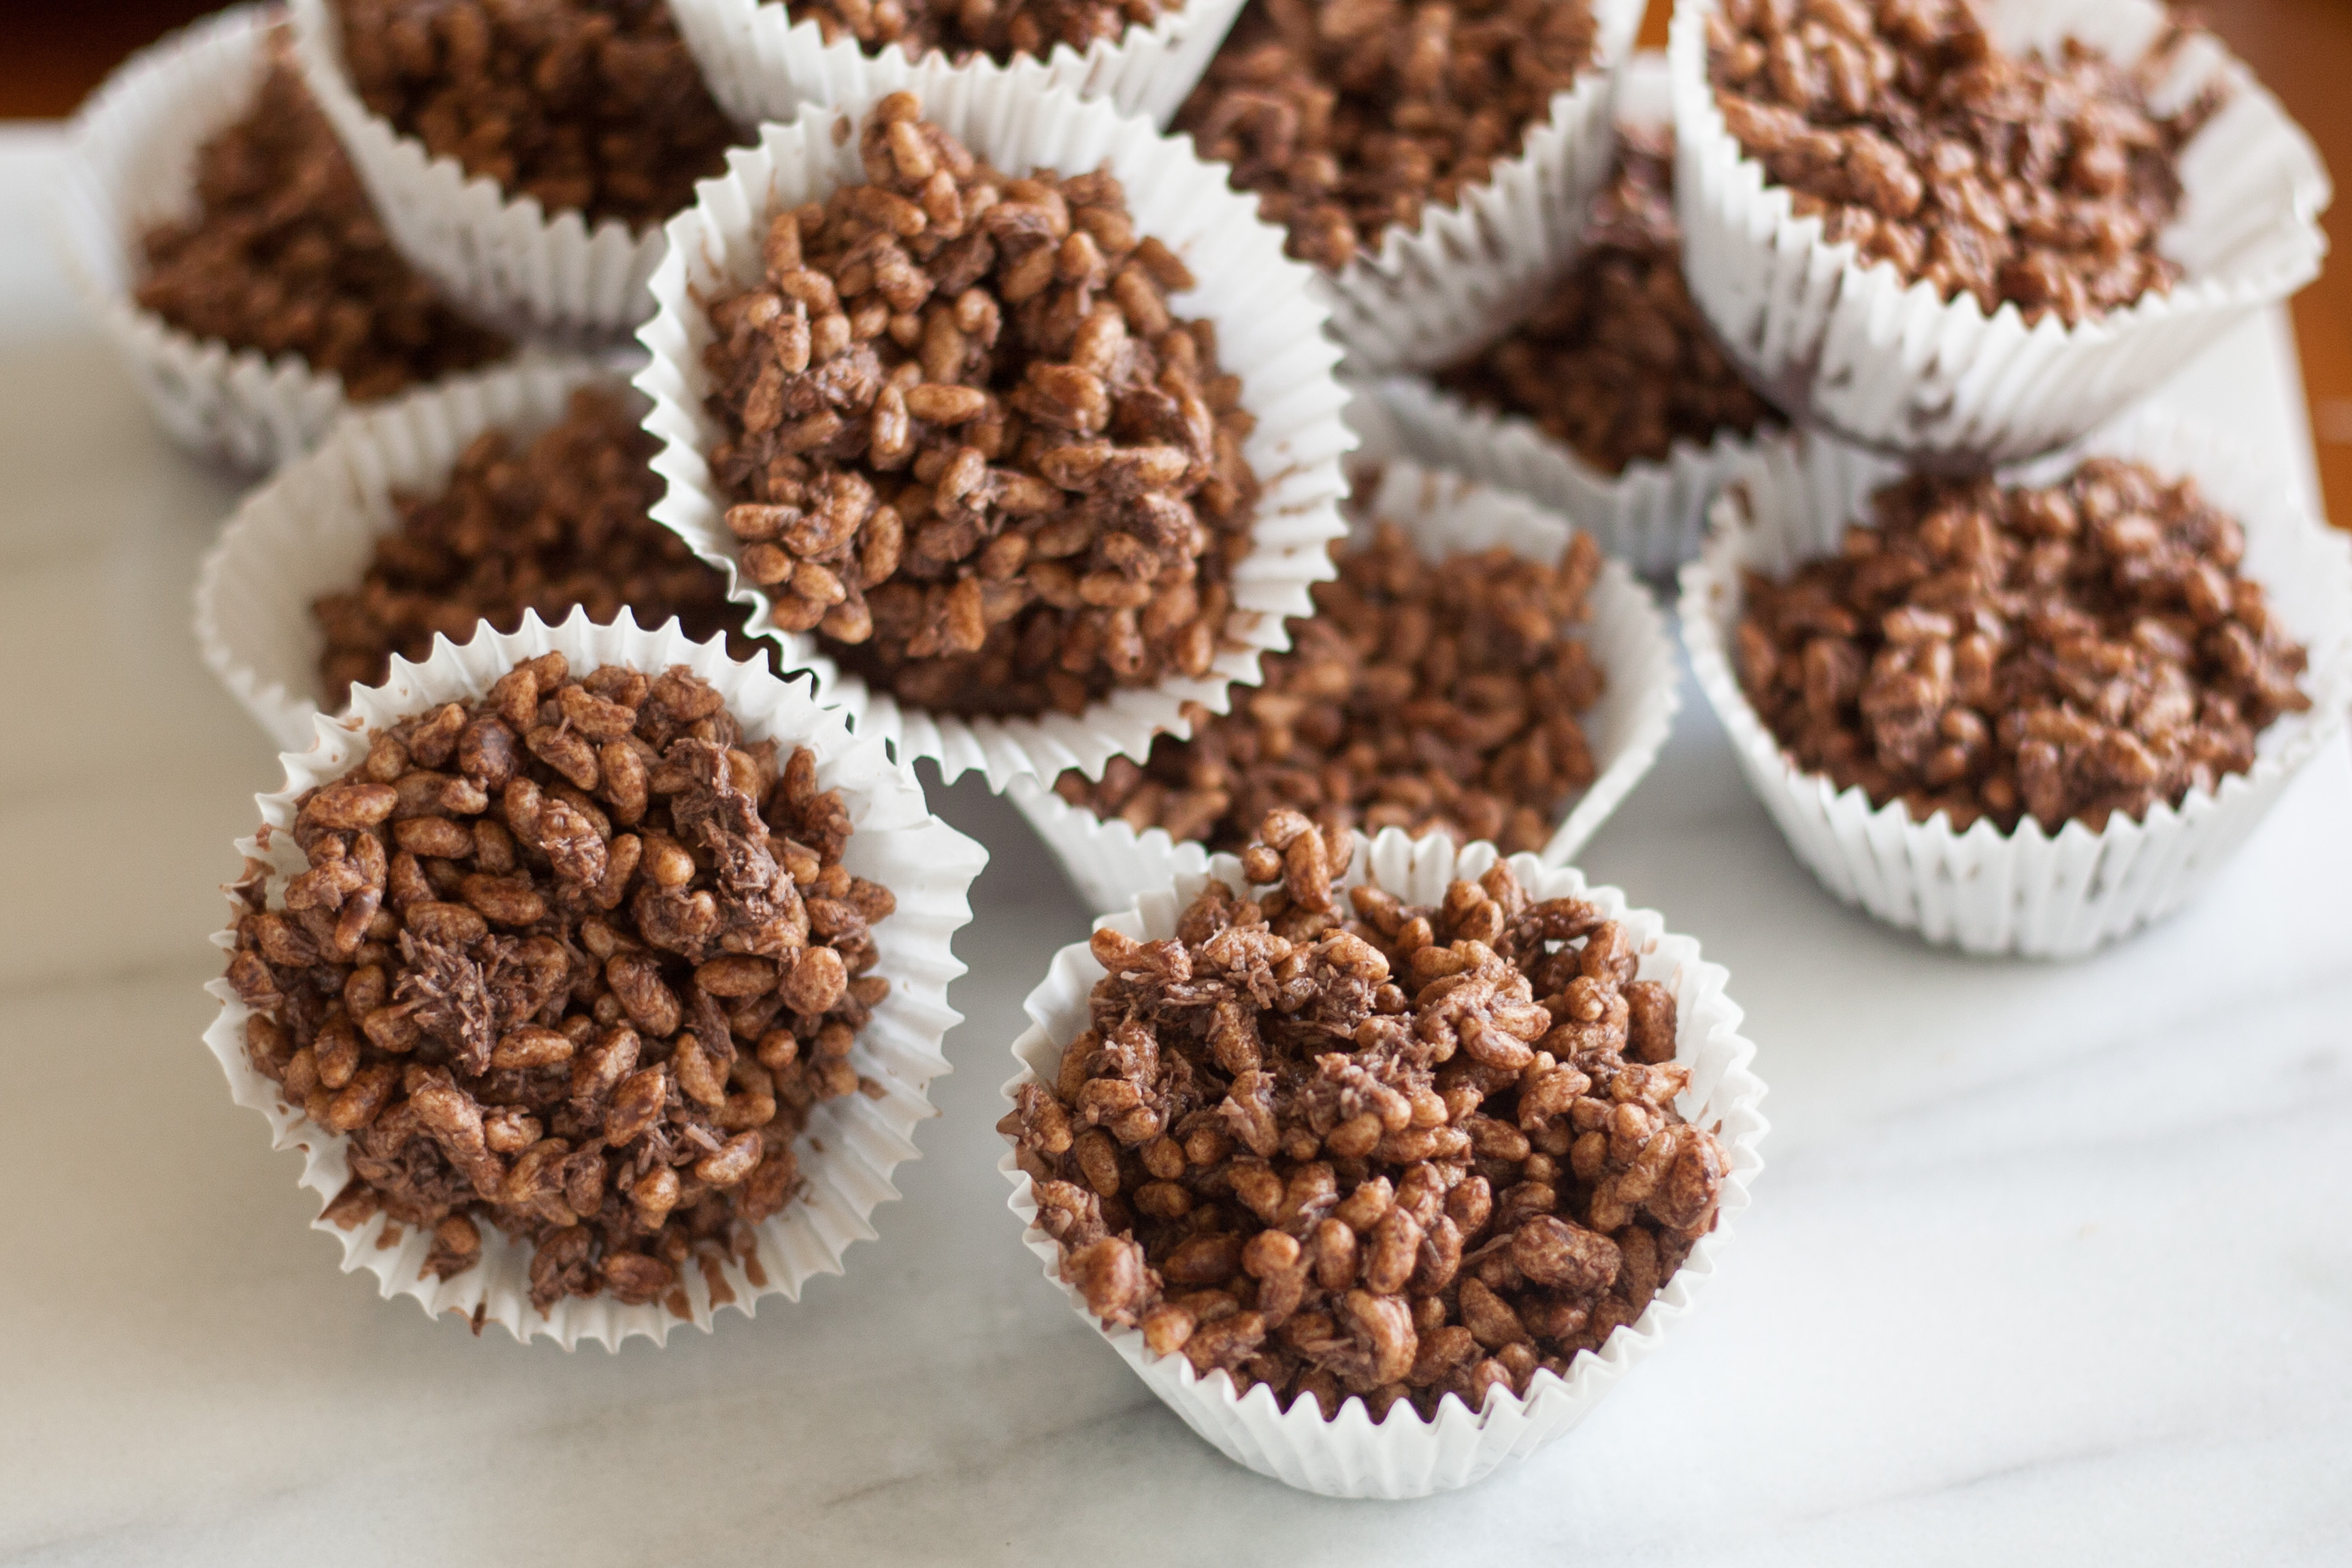 How to Make Chocolate Crackles